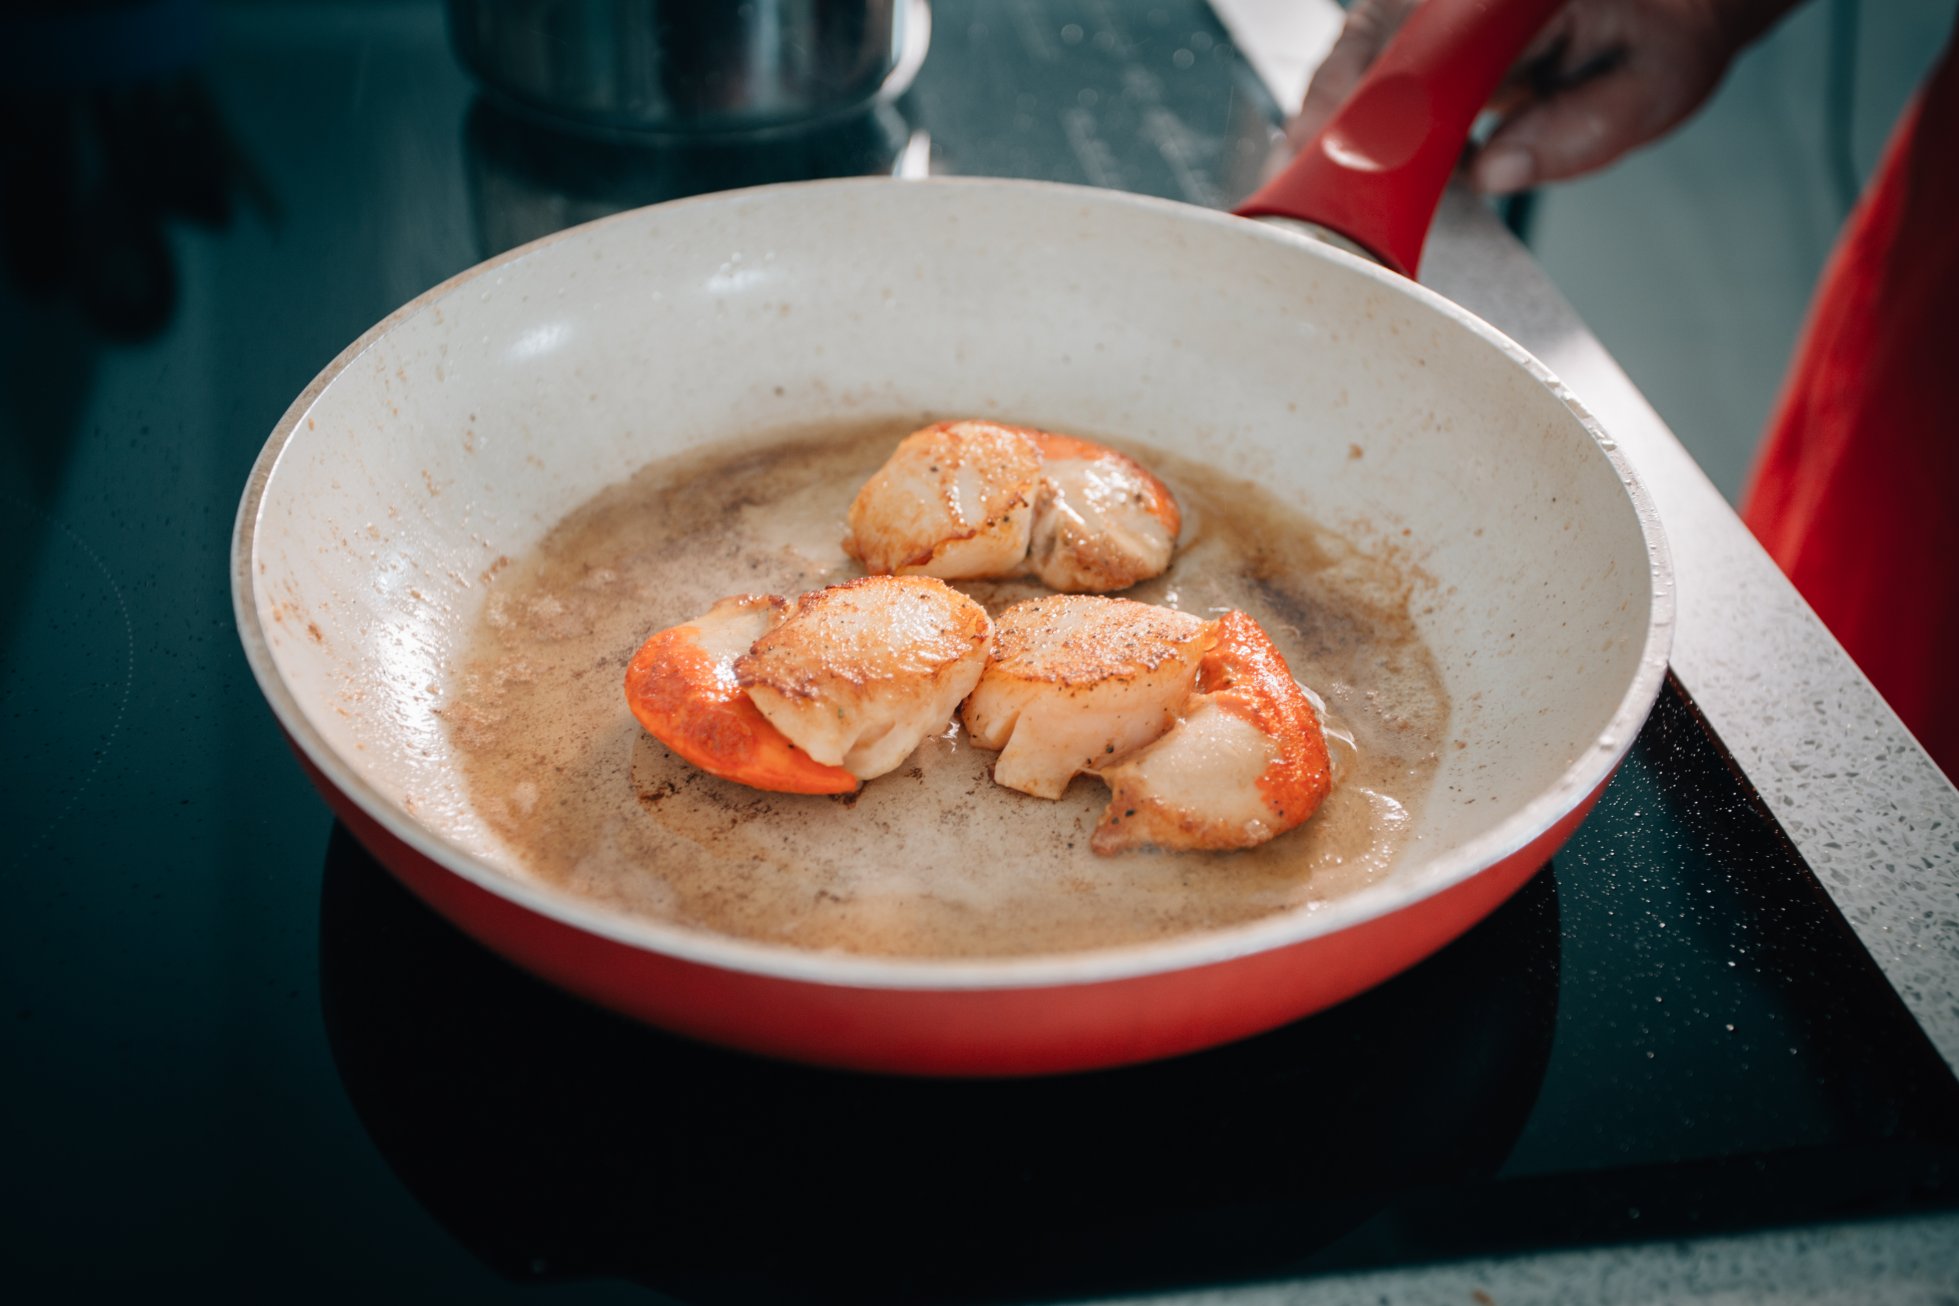 Scallops are one of the most popular items on menus in restaurants across Orkney